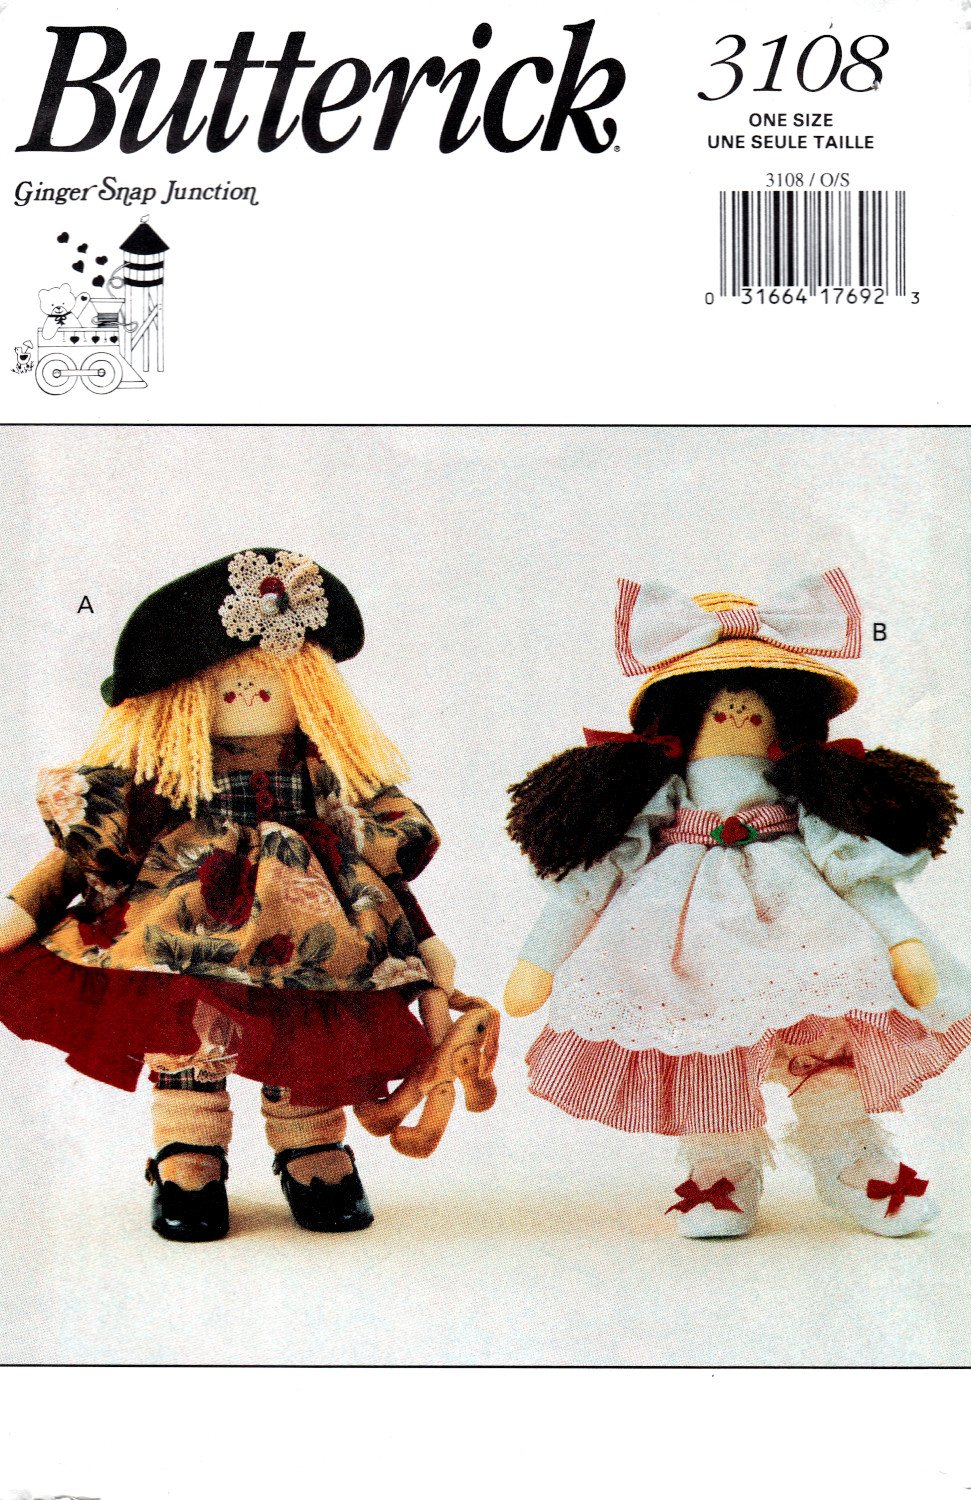 Butterick 3108 Ginger Snap Junction Annie Applecheeks Dolls and Outfits Sewing Pattern Size OSZ